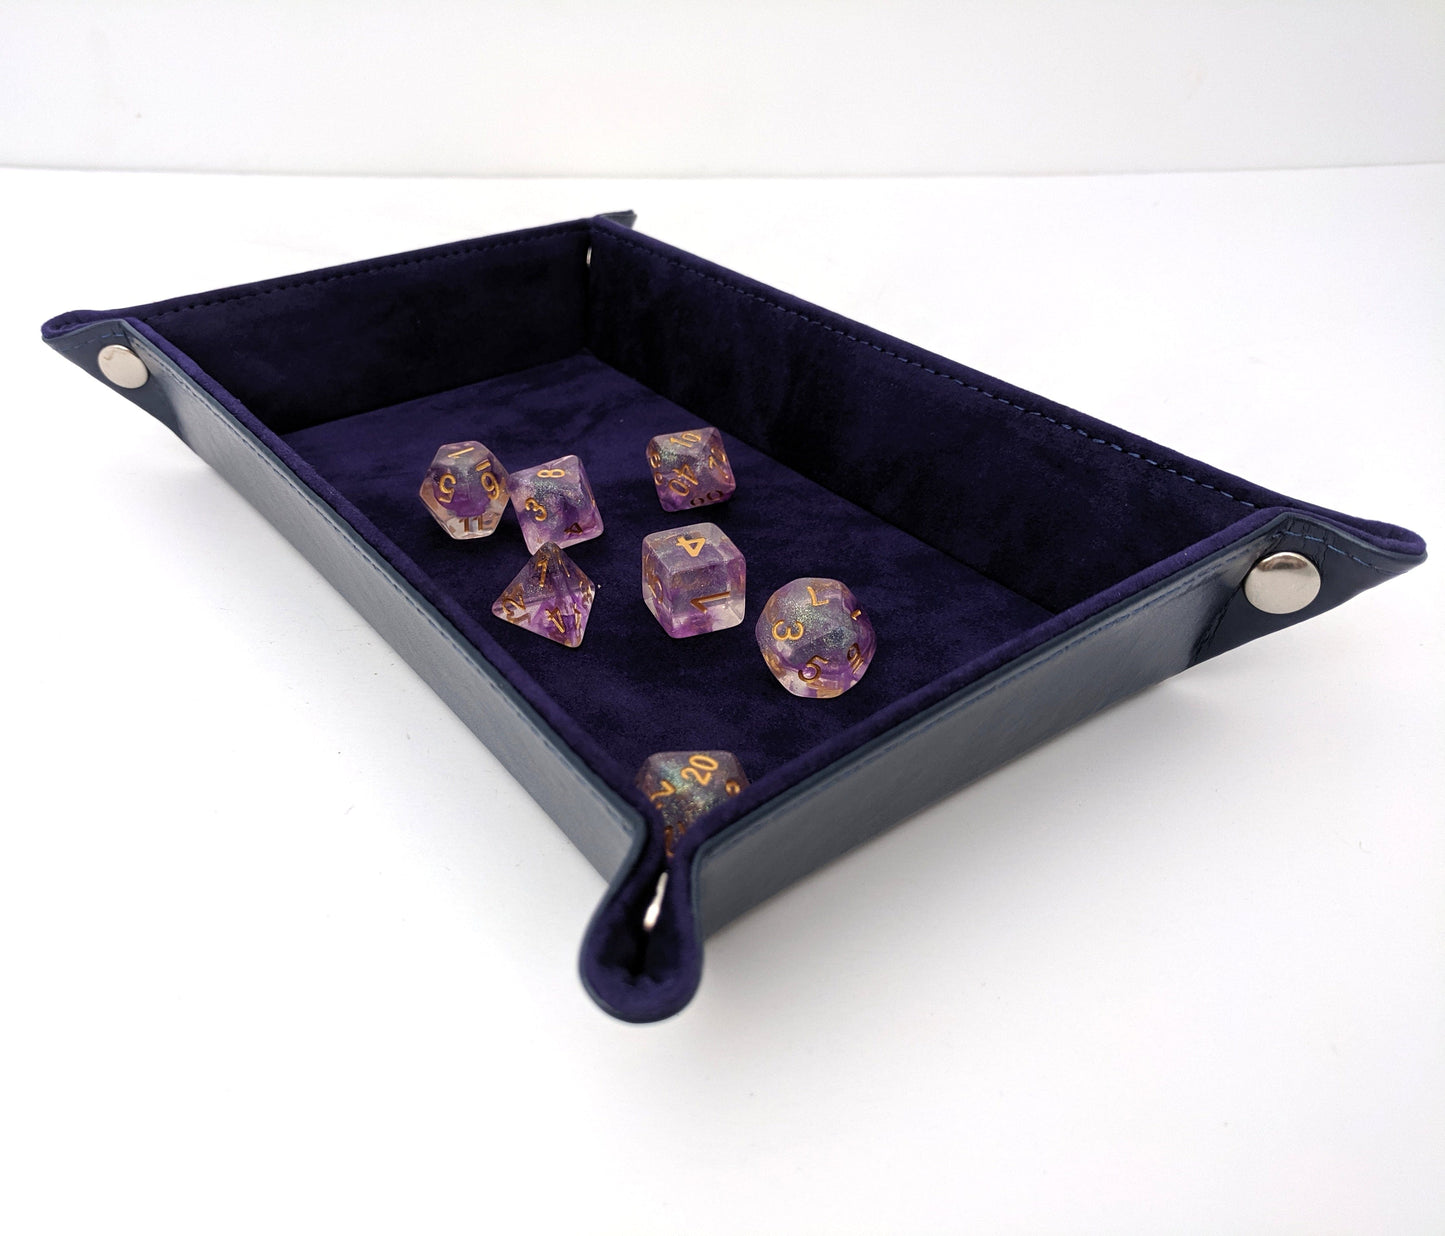 Dice Rolling Tray. Velvet and PU leather Rectangular Dice Tray - CozyGamer